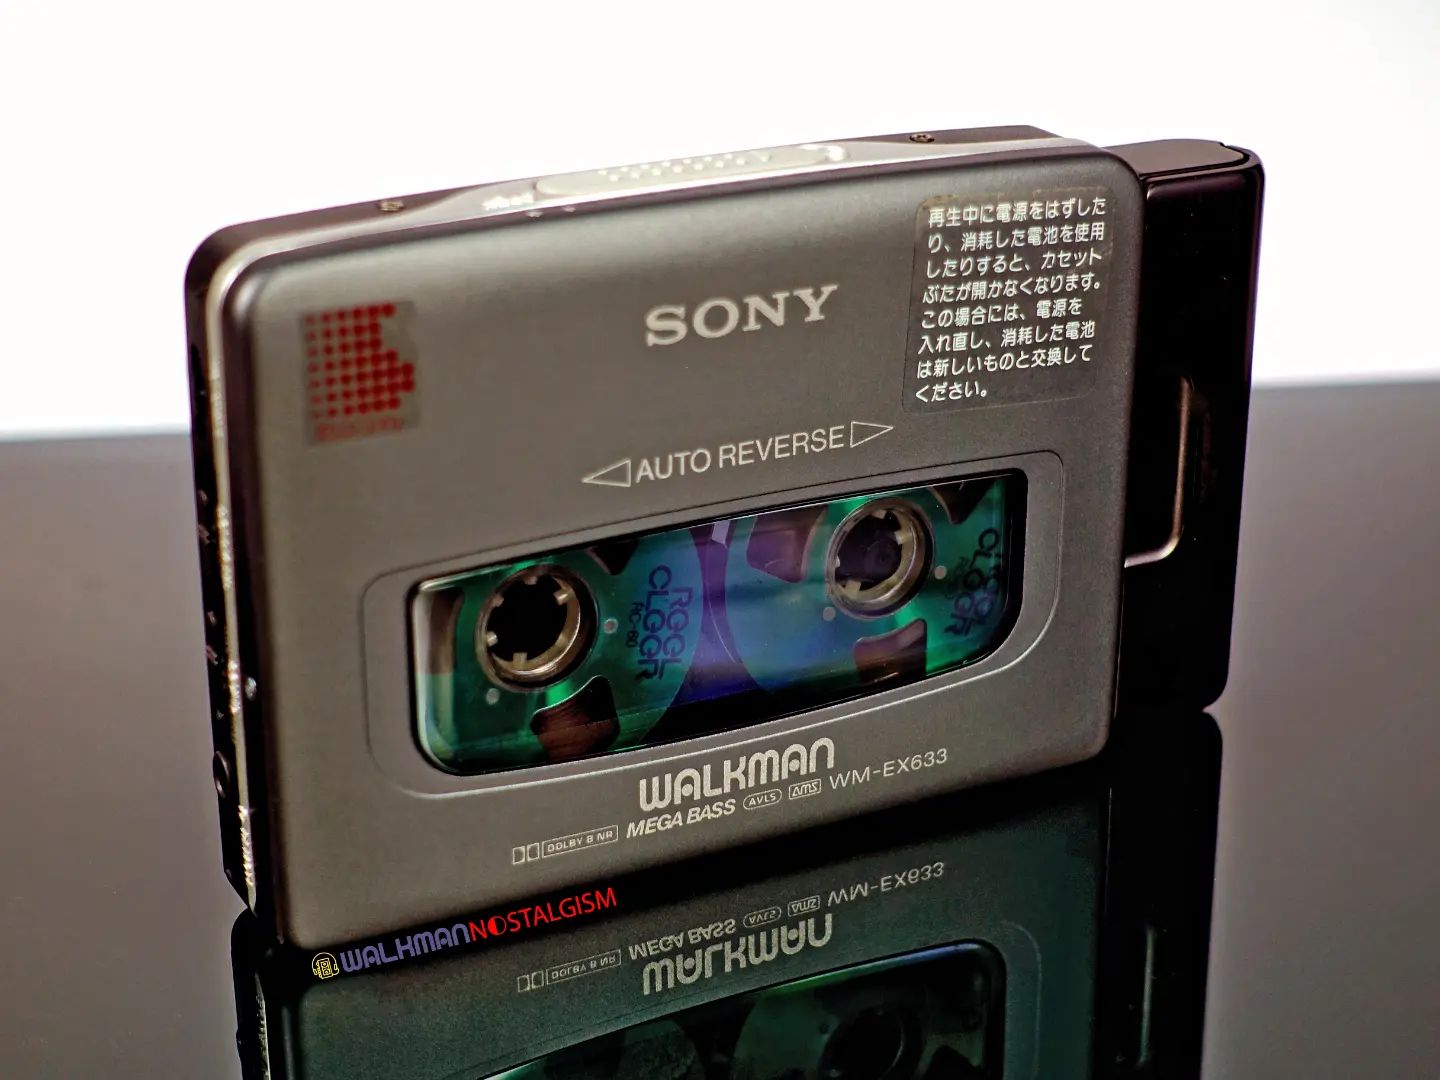 Sony_WM-EX633_-_Angled_front_with_cassette_and_sidecar_ig-walkmannostalgism